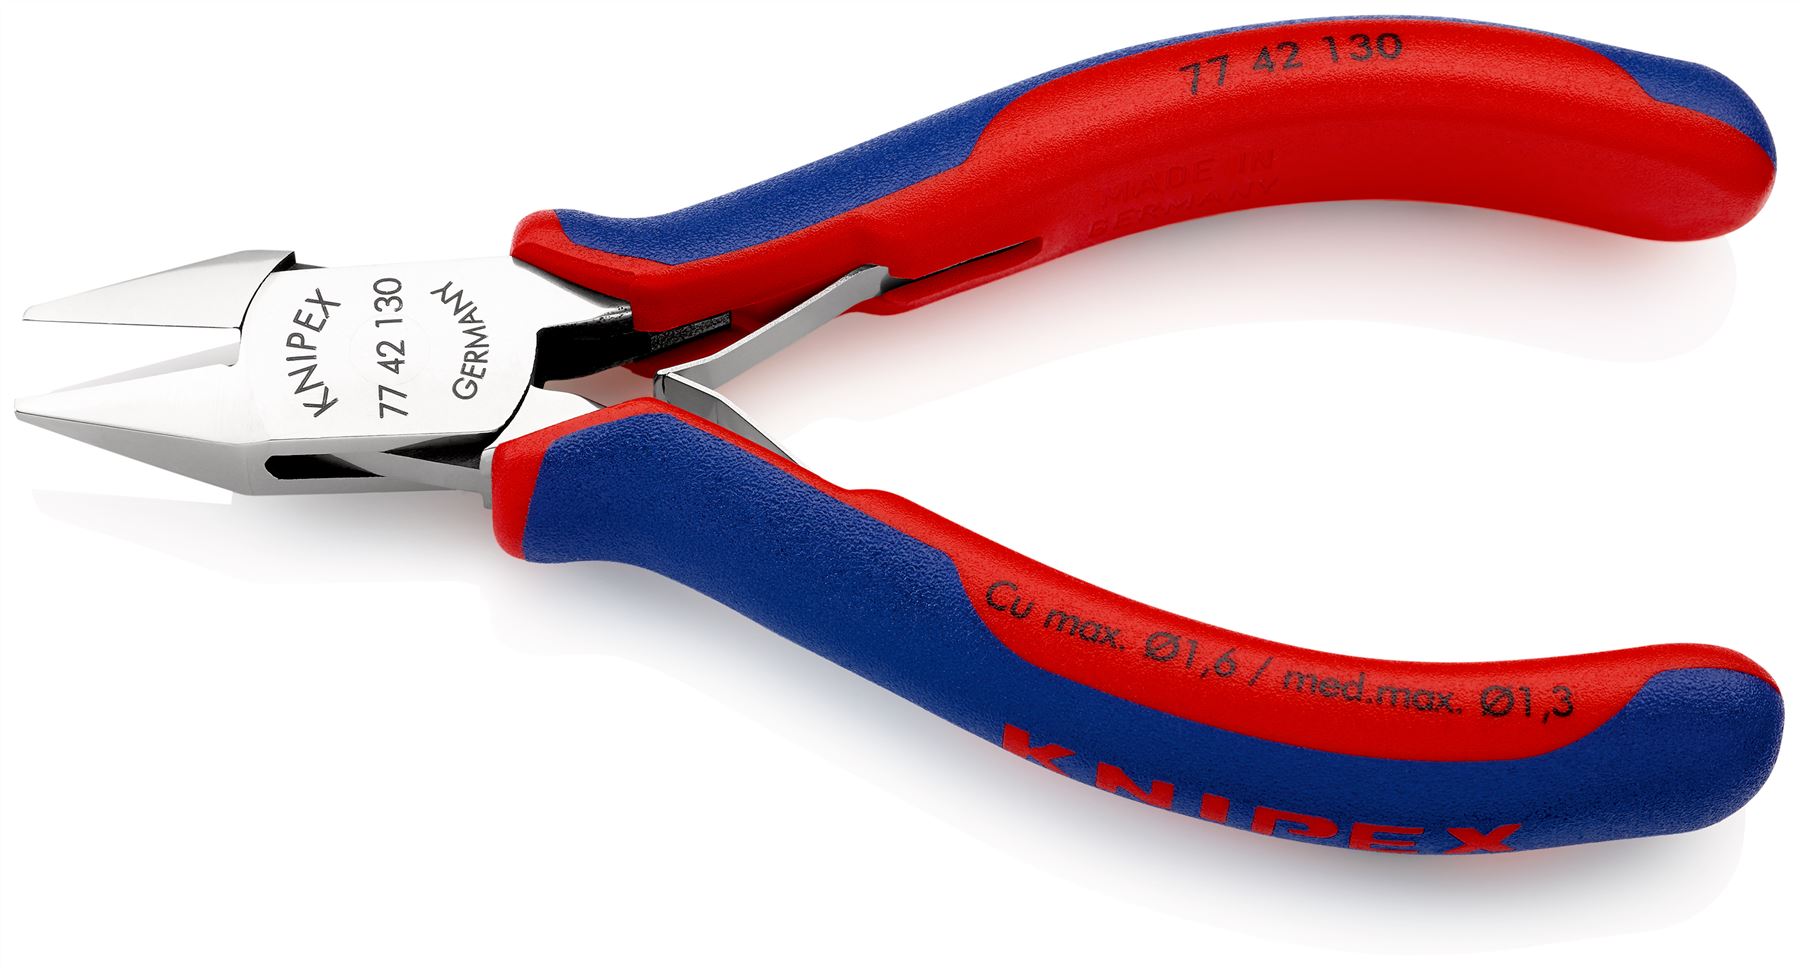 KNIPEX Electronics Diagonal Cutter Pliers Pointed Head without Bevel 130mm Multi Component Grips 77 42 130